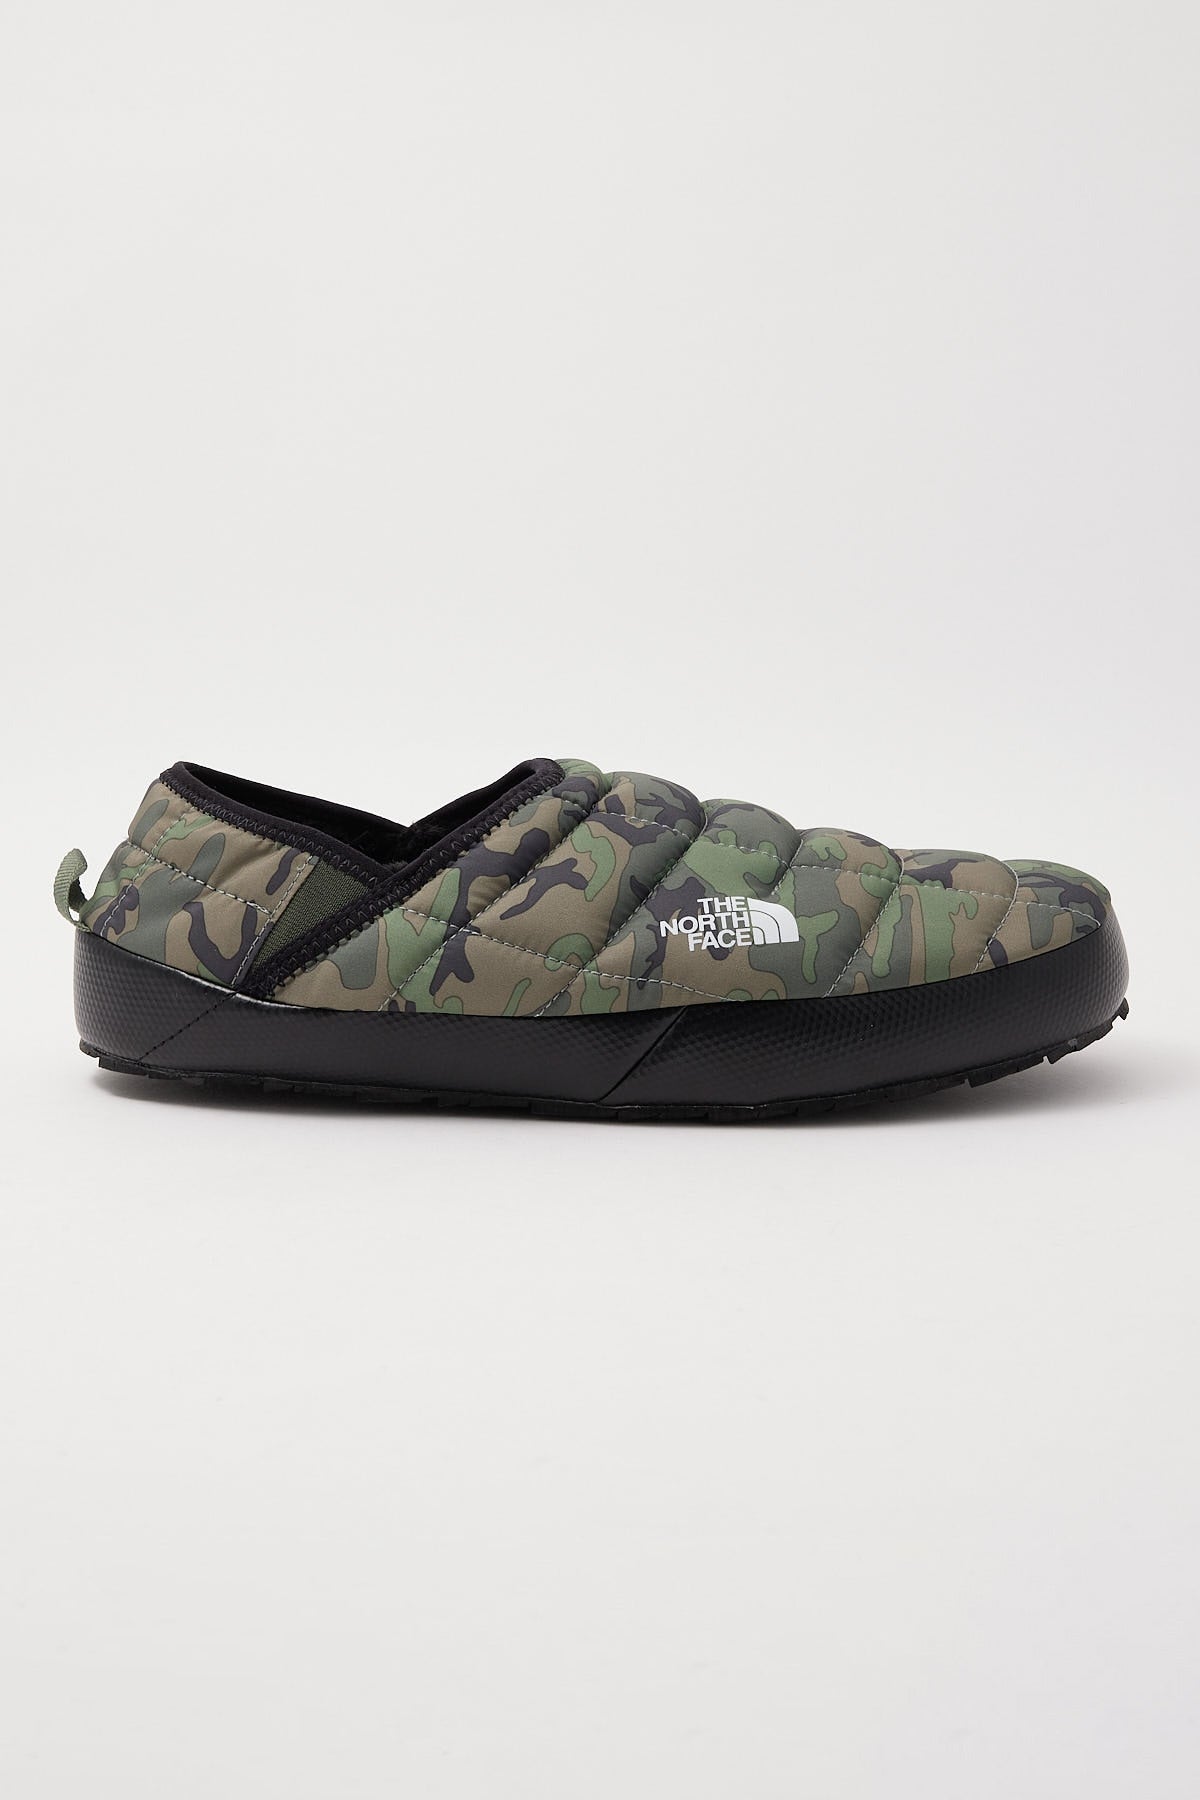 The North Face Thermoball Traction Mule Cameo/Thyme